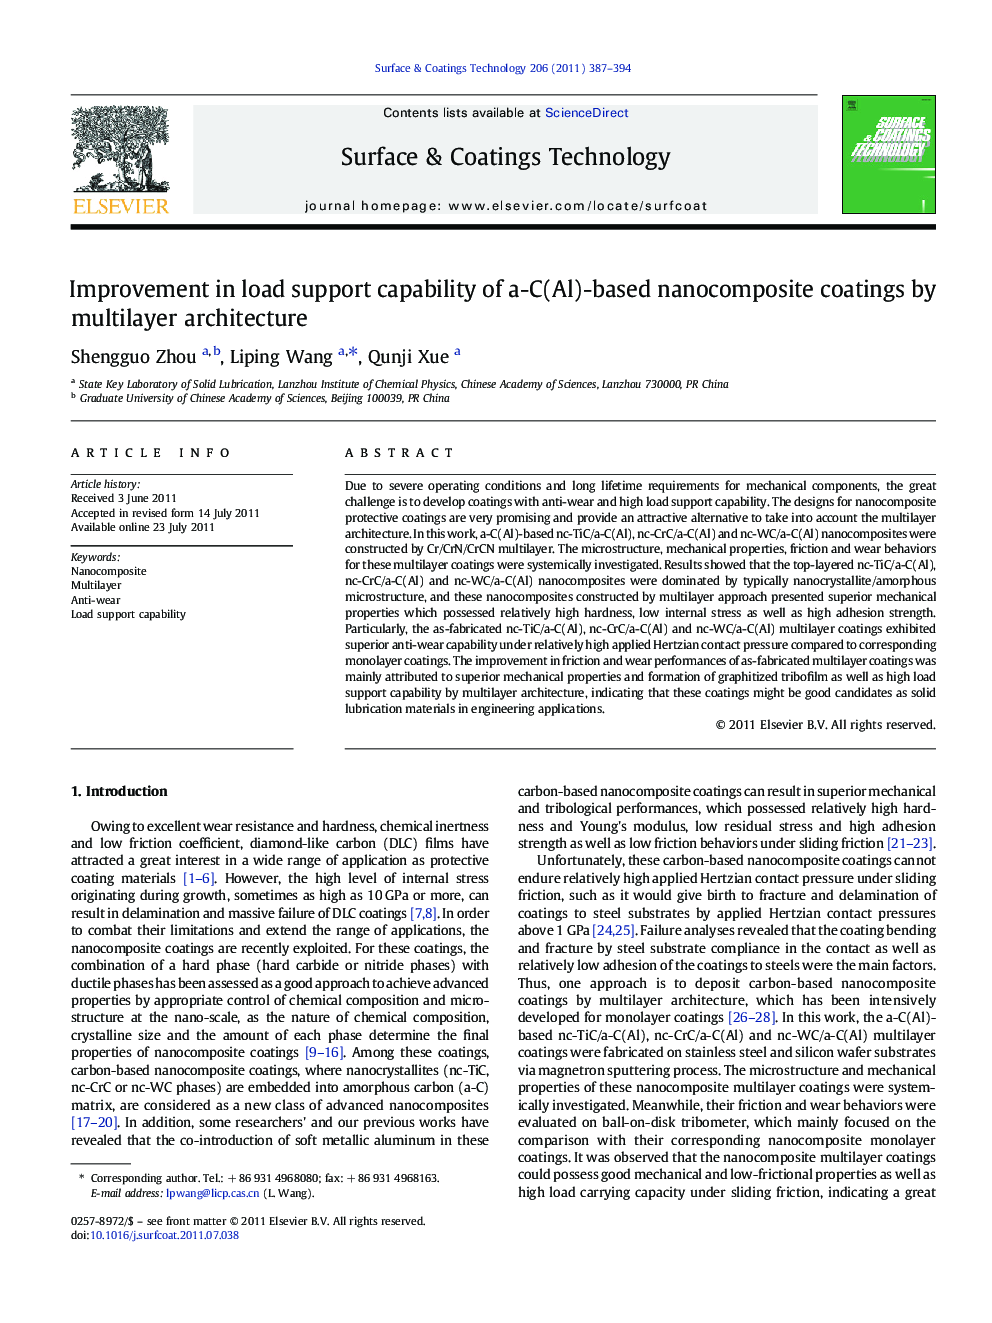 Improvement in load support capability of a-C(Al)-based nanocomposite coatings by multilayer architecture